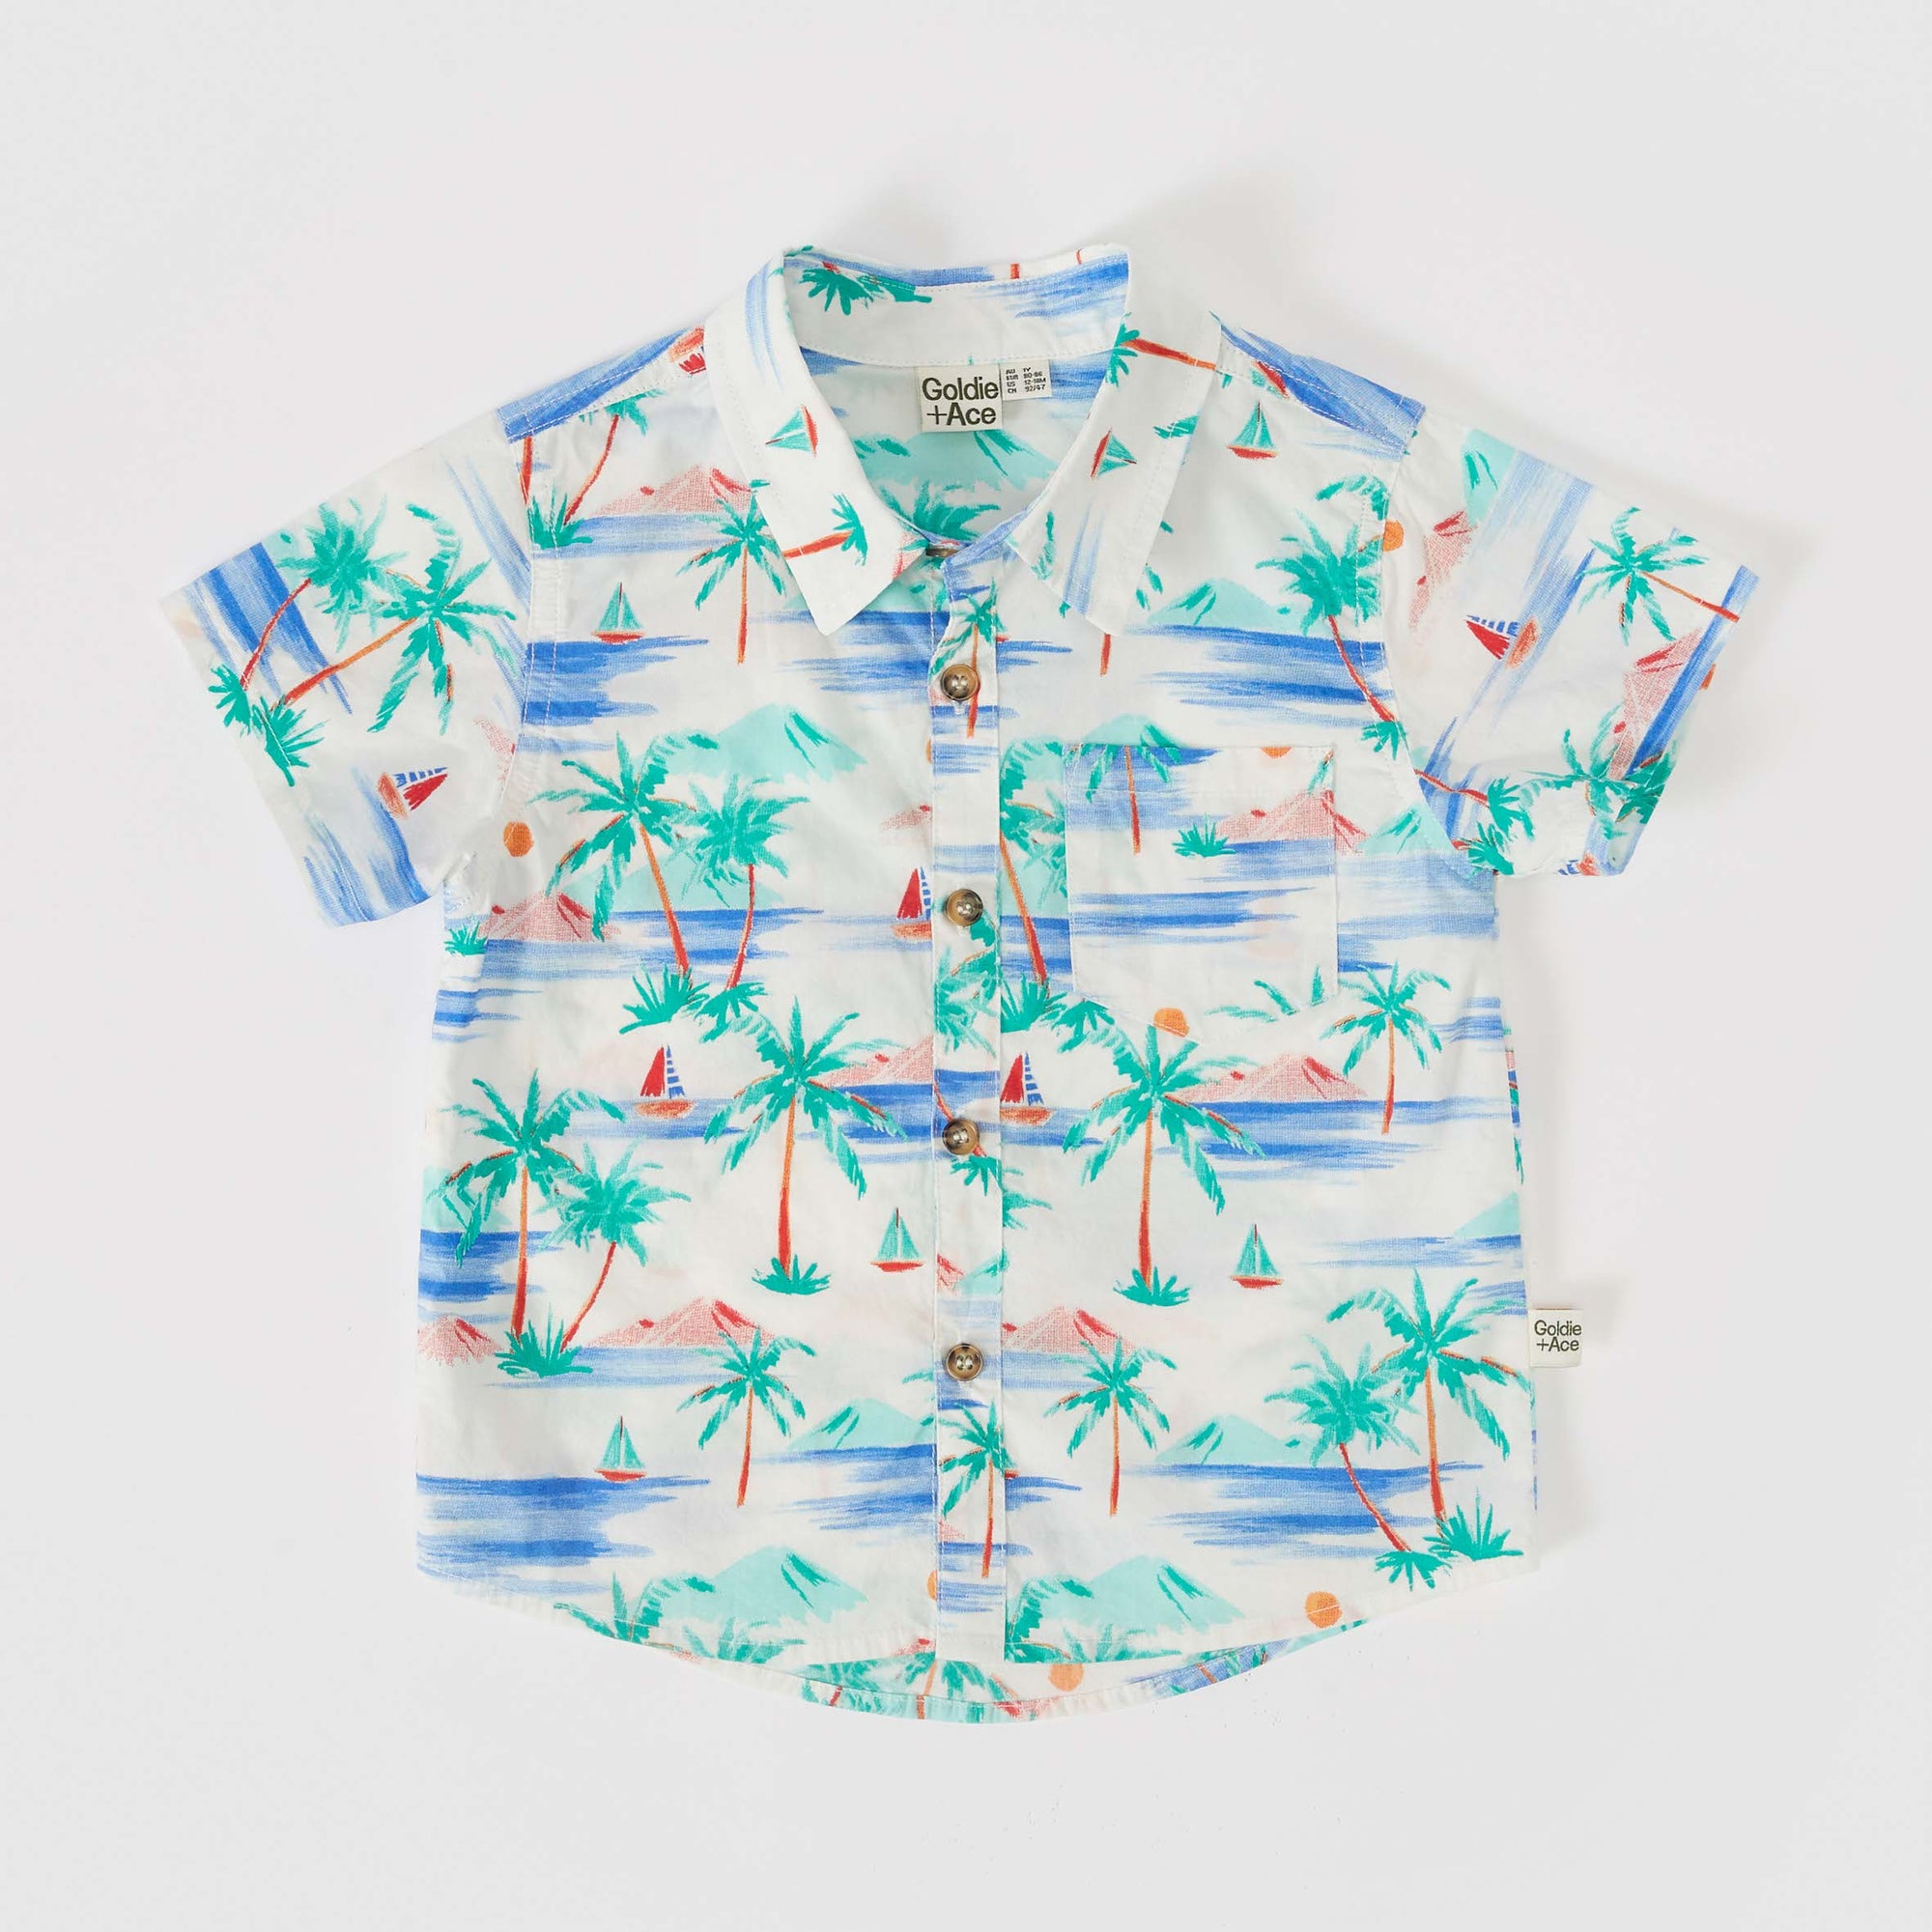 Goldie+Ace | Holiday Cotton Shirt - Paradise White